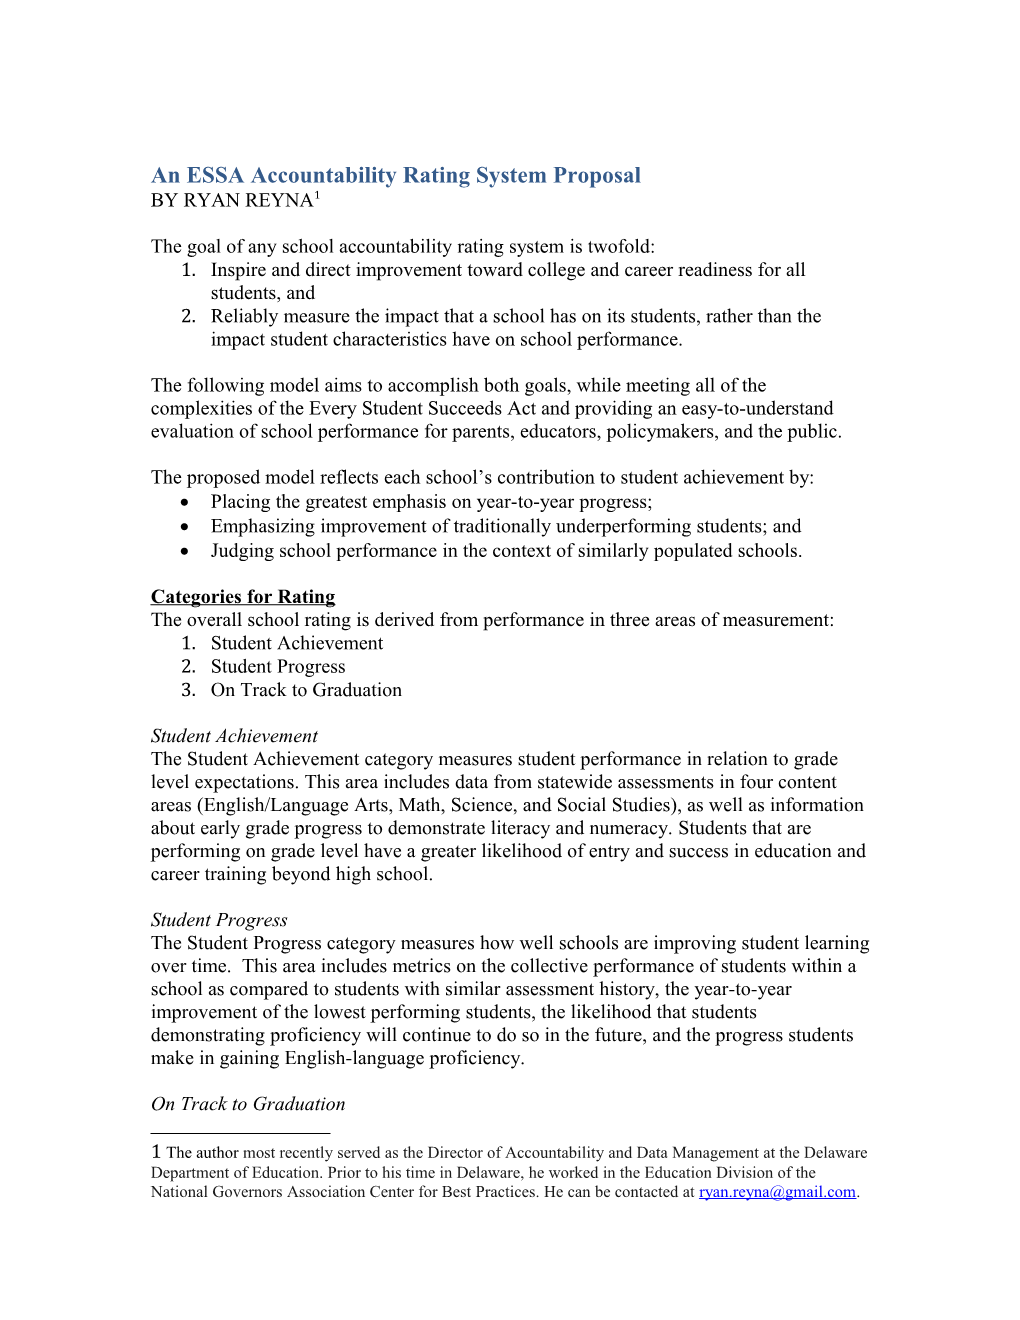 An ESSA Accountability Rating System Proposal